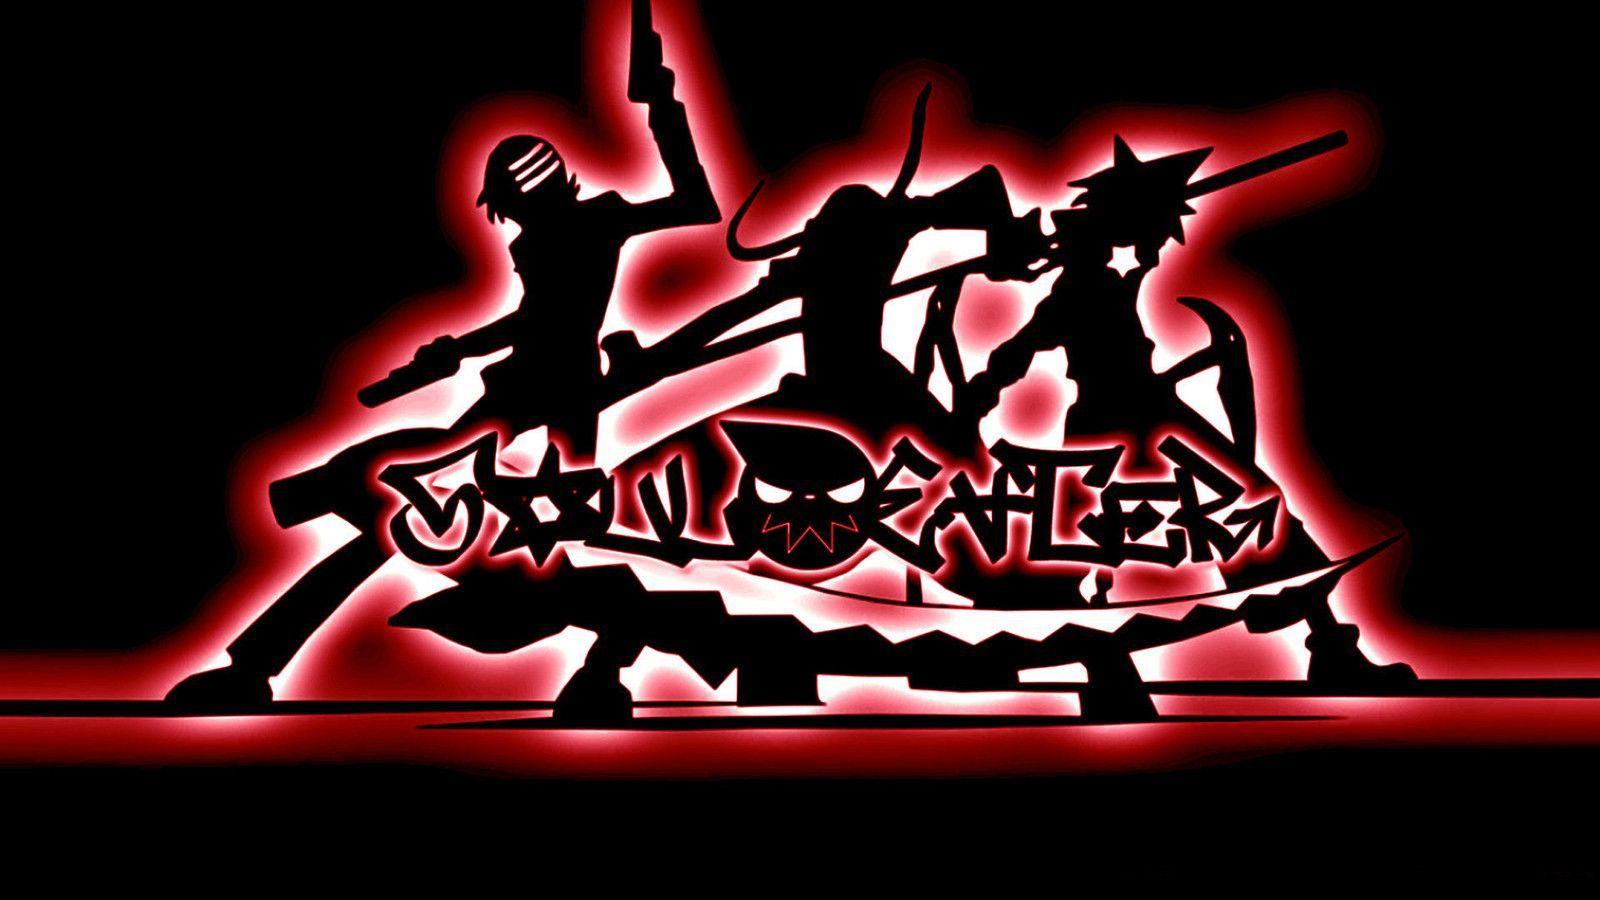 Excalibur Soul Eater Wallpapers